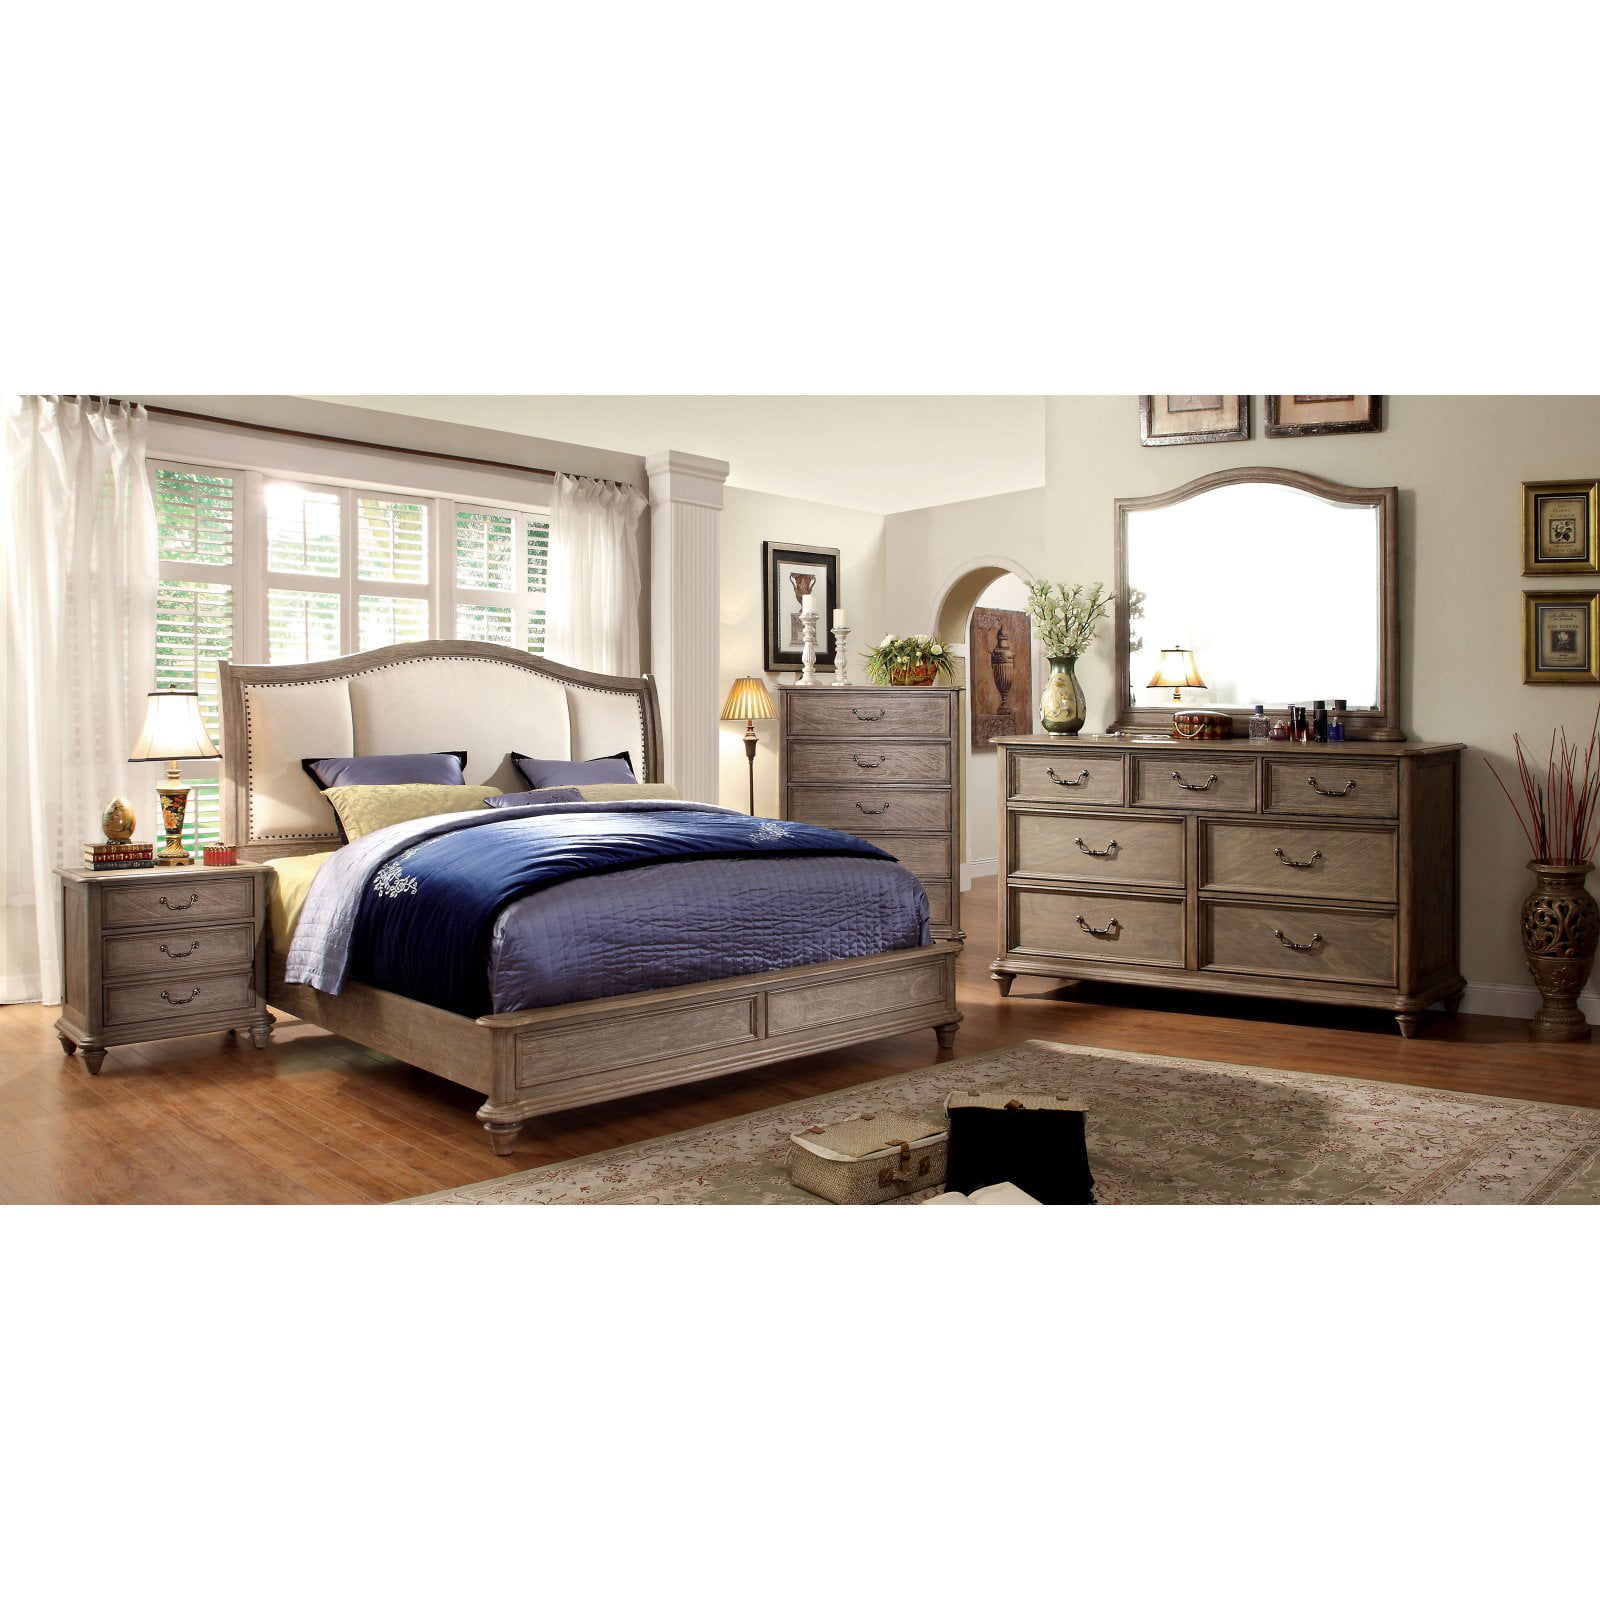 America Pascucci Upholstered Sleigh Bed, Althea Upholstered Sleigh Bed King